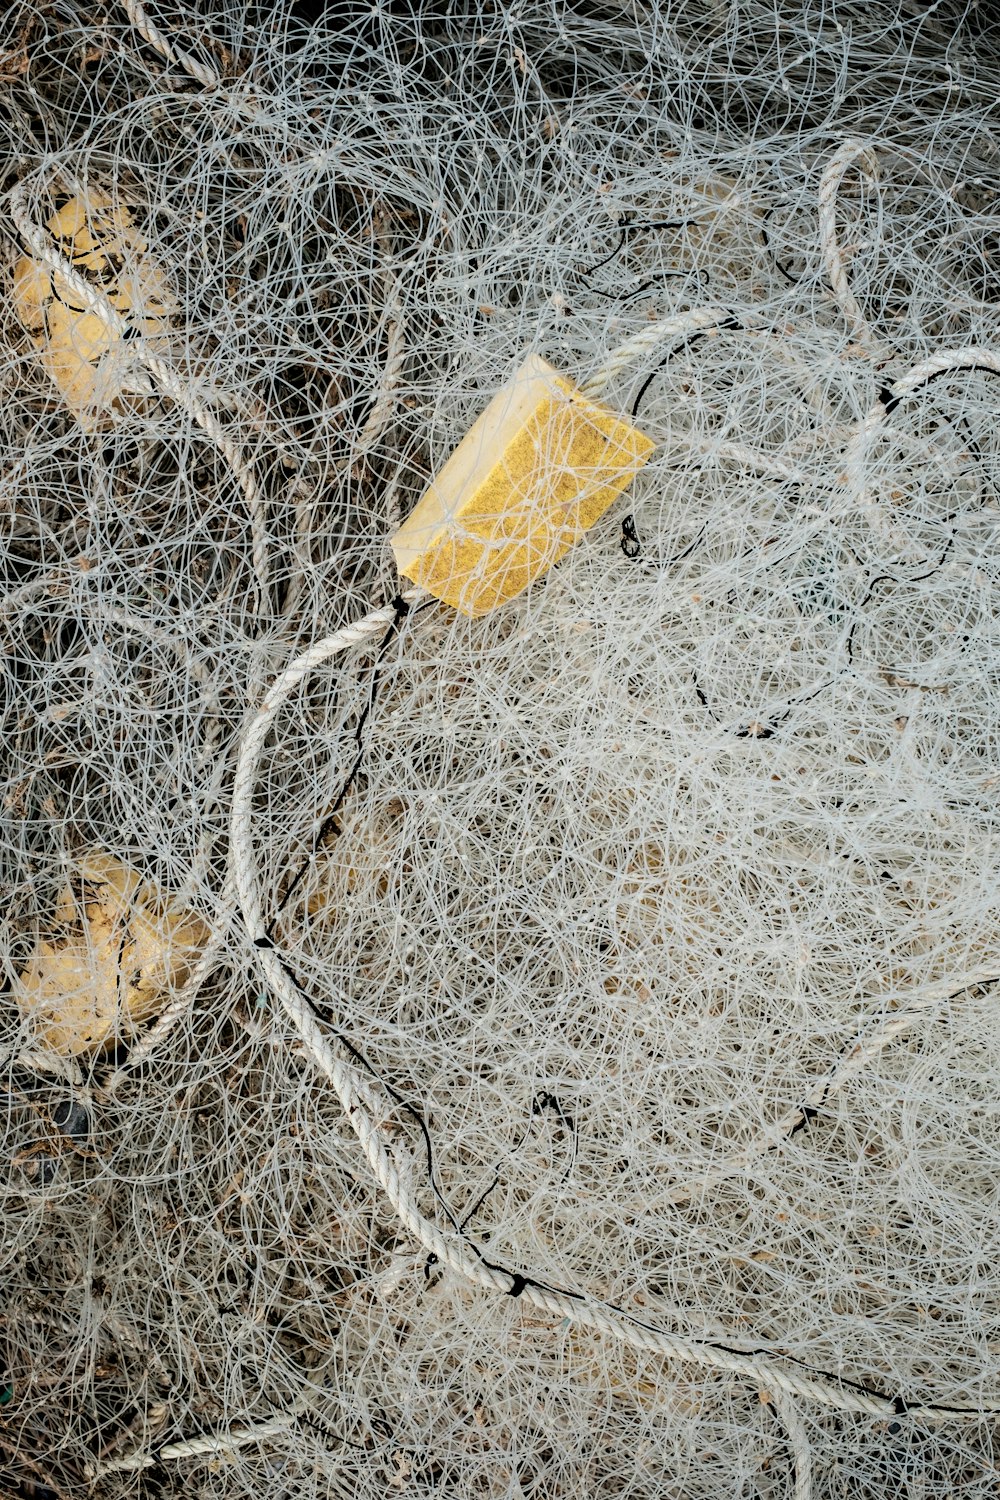 a piece of yellow and white wire next to a yellow object